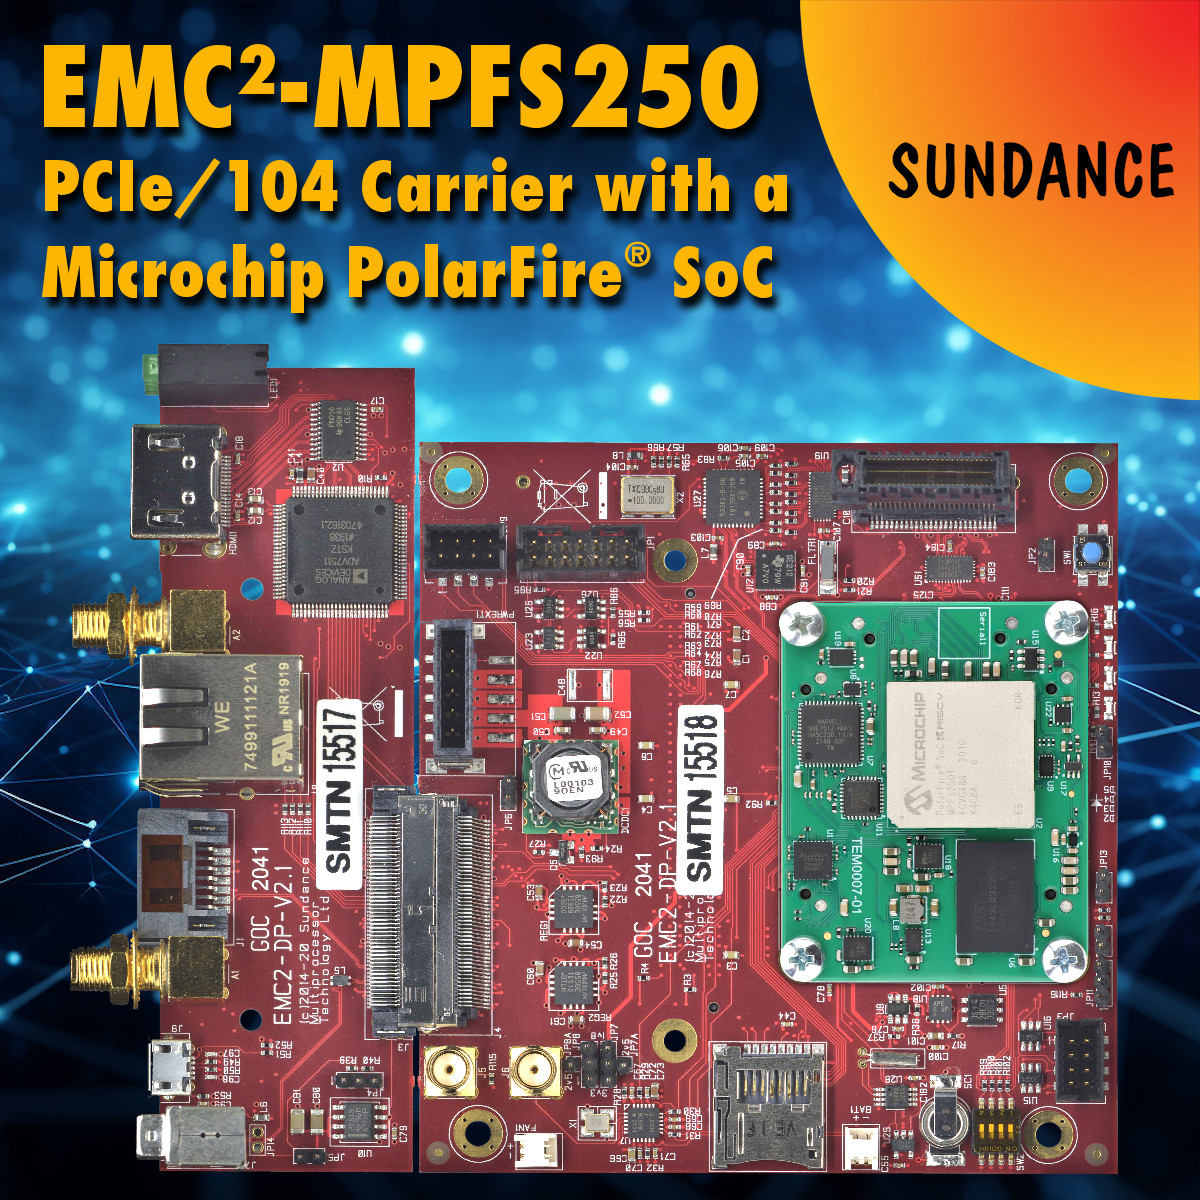 The EMC²-MPFS250 system synergises two components: a SoM from Trenz Electronic with a PolarFire® SoC and Sundance’s EMC² – a PC104 SoM Carrier.

sundance.com/emc2-mpfs250/

#PC104 #Microchip #PCIe104 #PolarFire #FPGA #SoC #TrenzElectronic #EmbeddedSystems #Embedded #PowerPC #RISCV